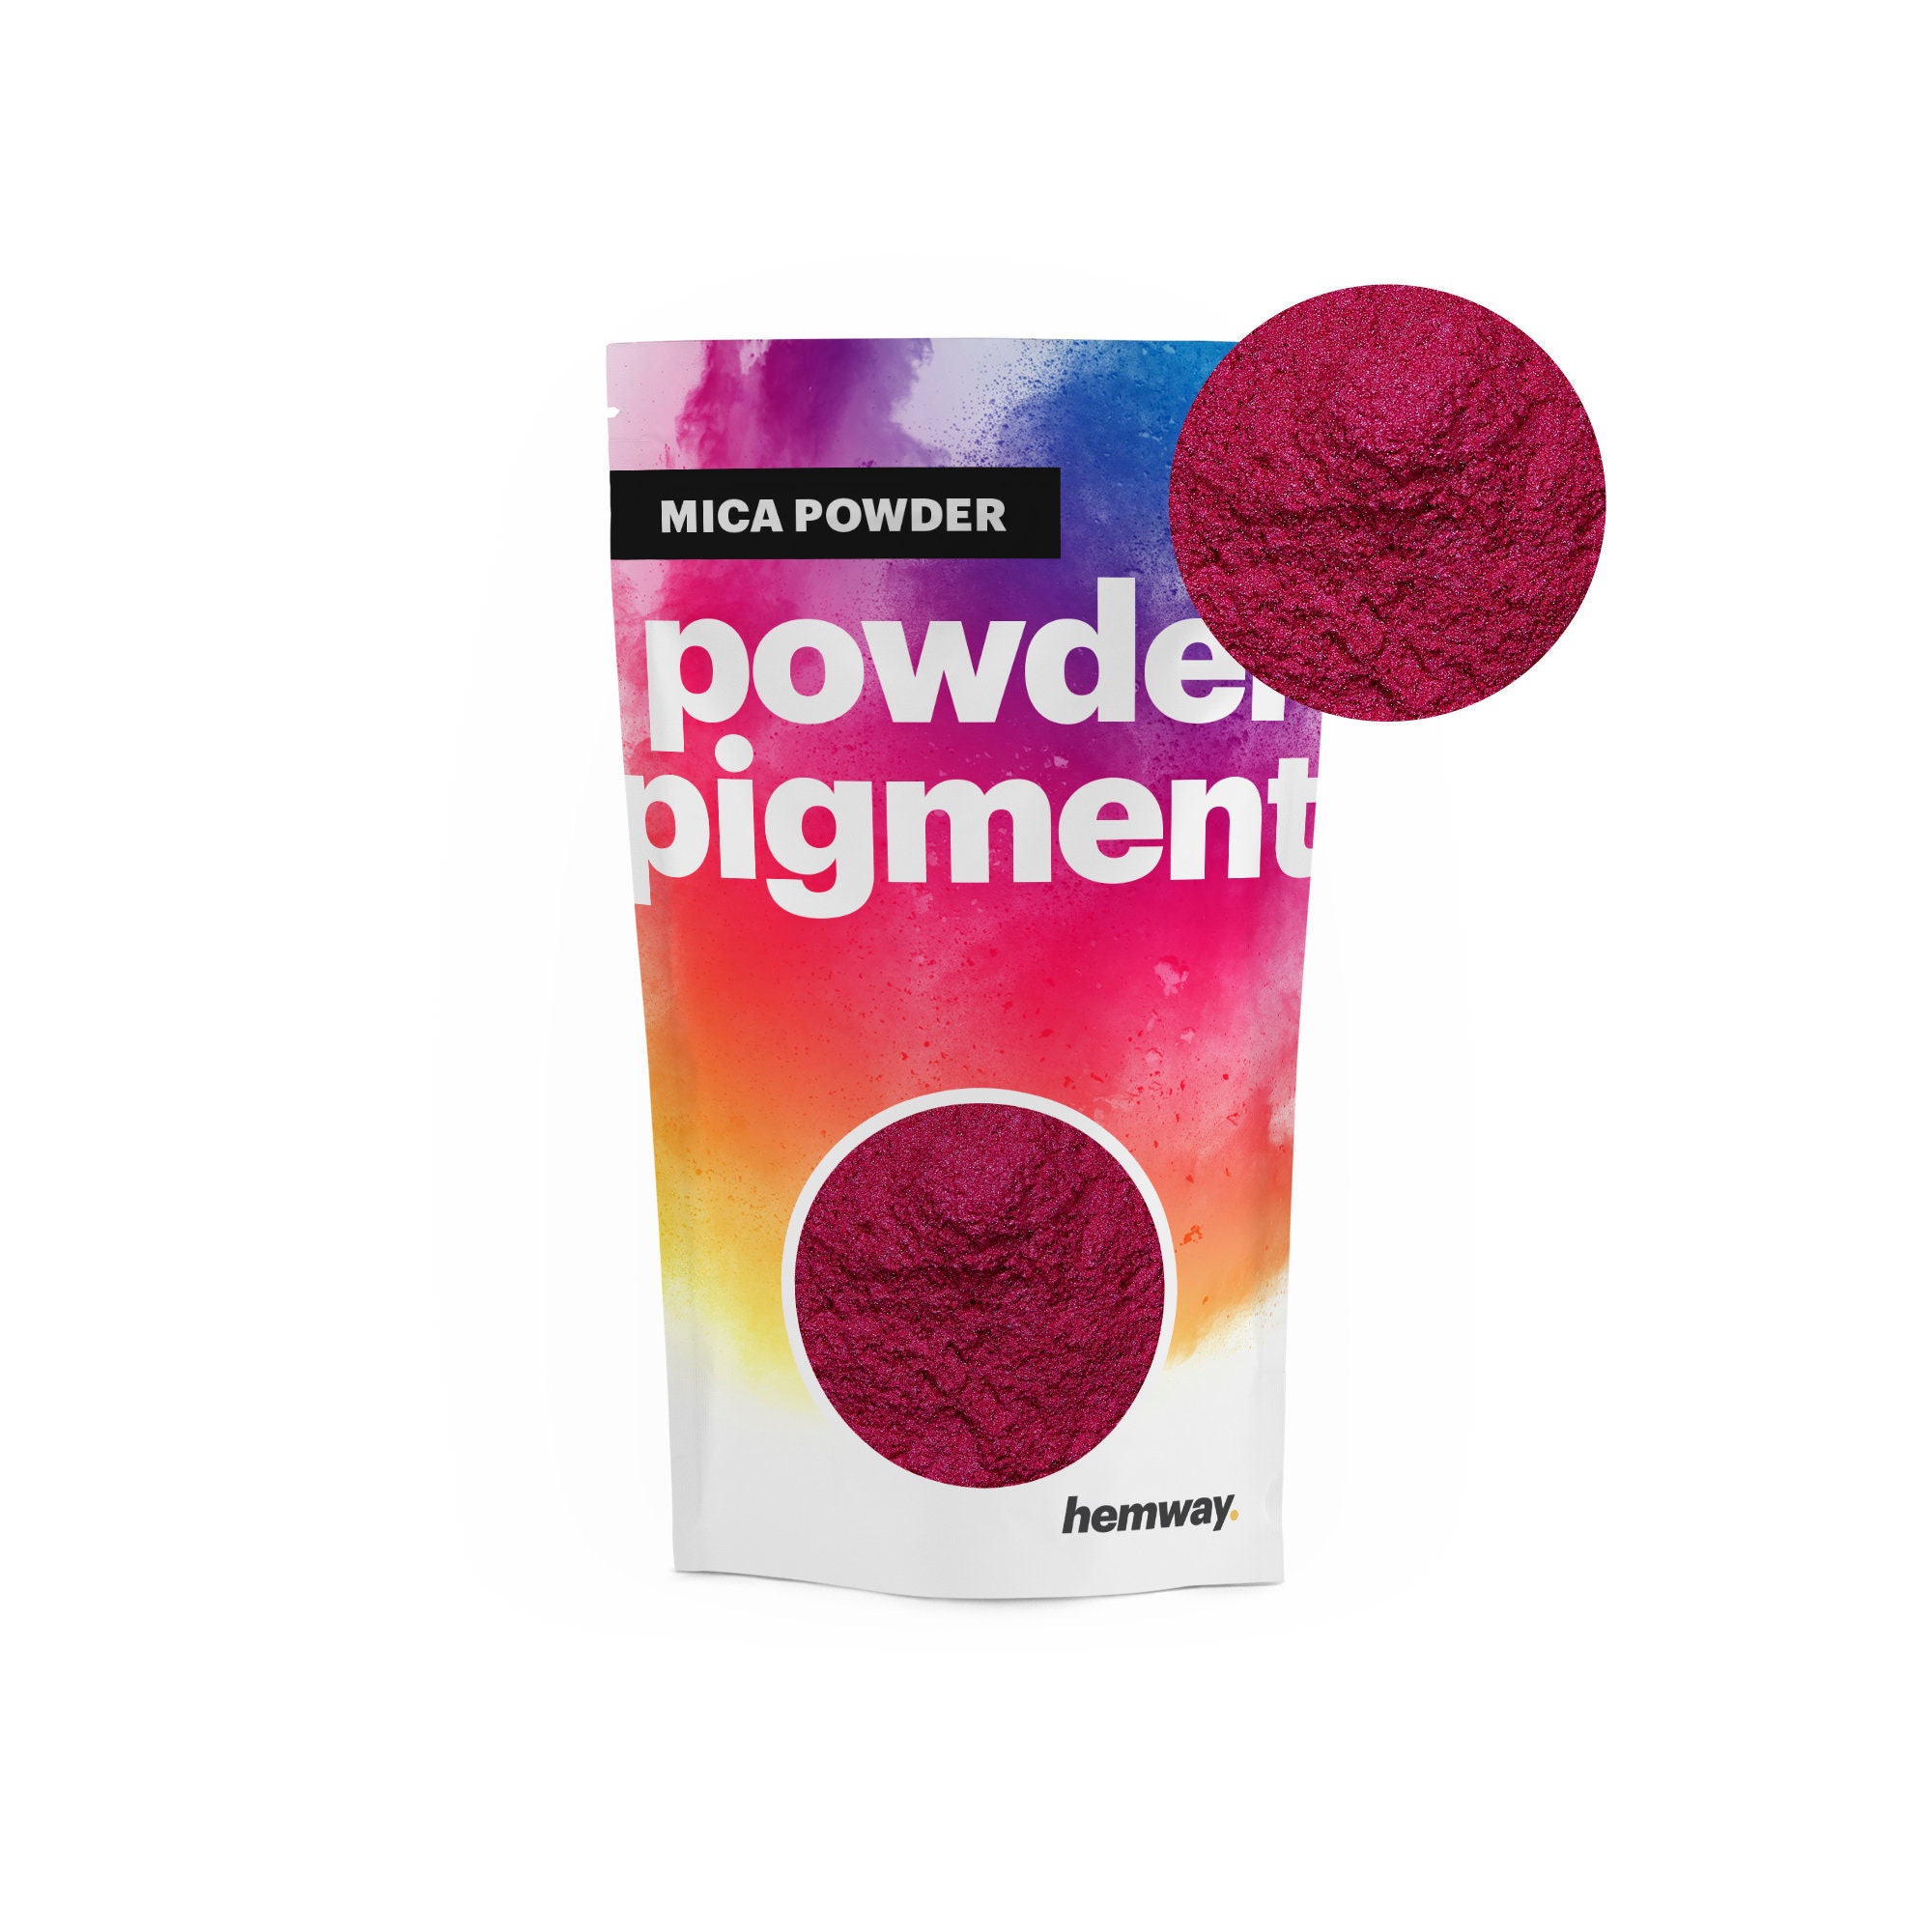 Cerise Candle Color Dye Chips for Candle Making Multiple Sizes Available 